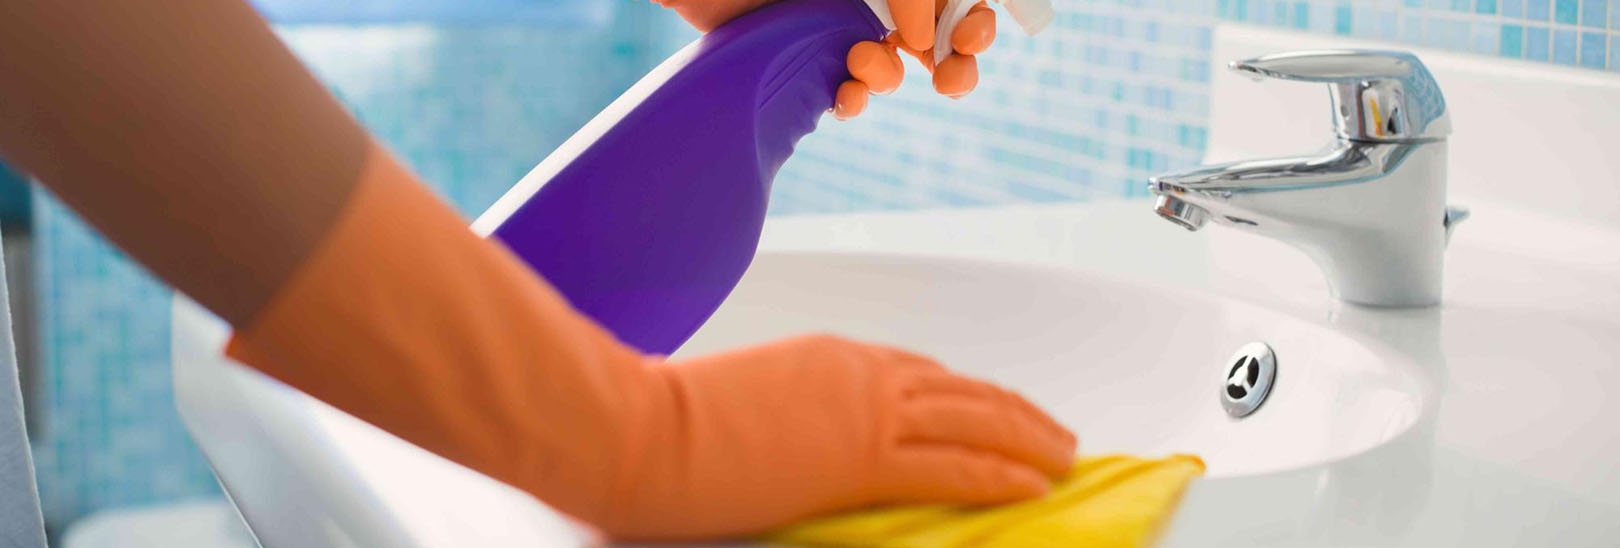 Cleaning Services - Magherafelt, Castledawson, Randalstown, Toome, Cookstown